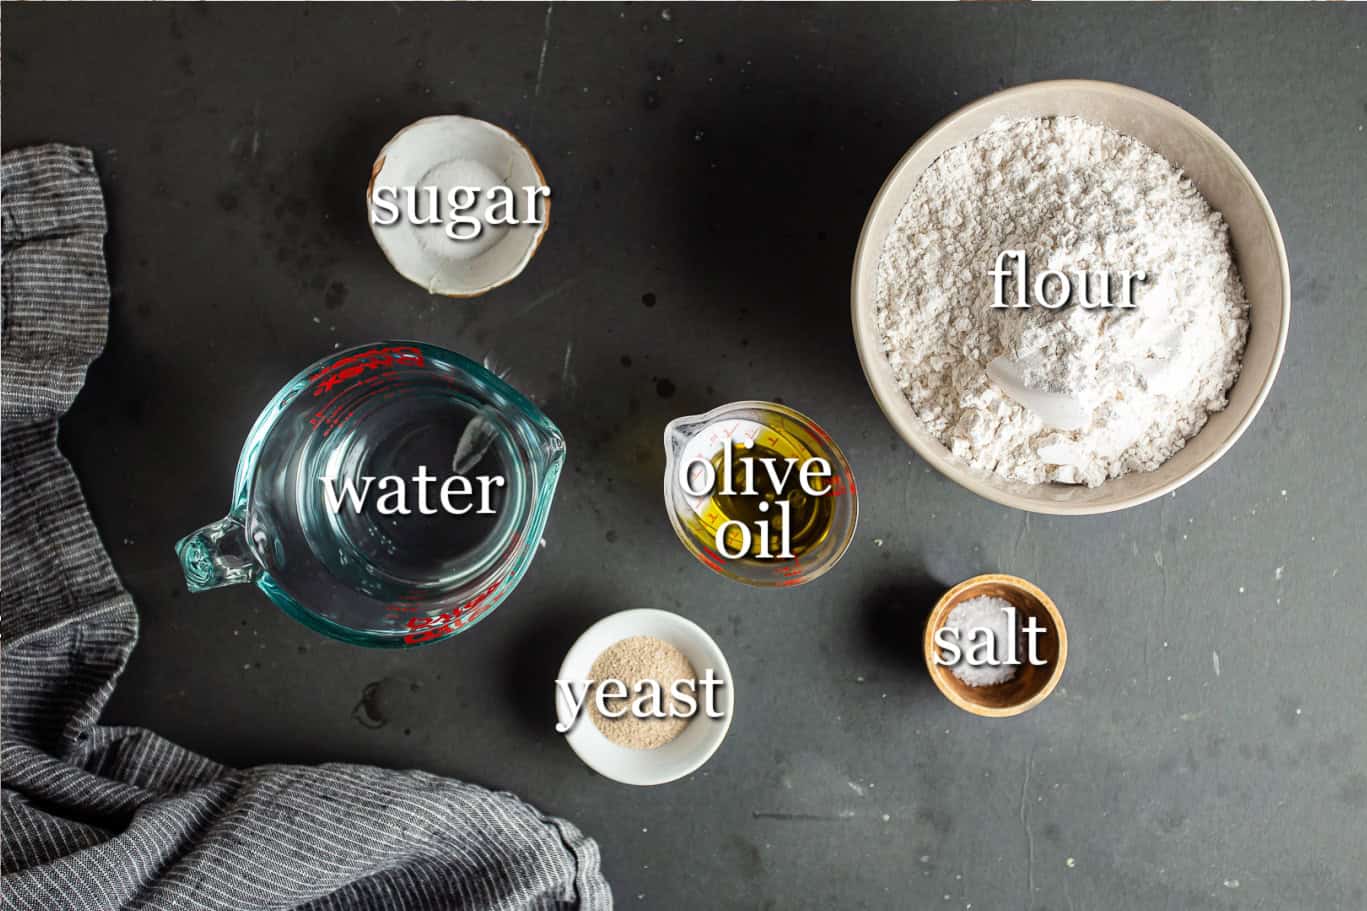 Ingredients for making pita bread, with text labels.